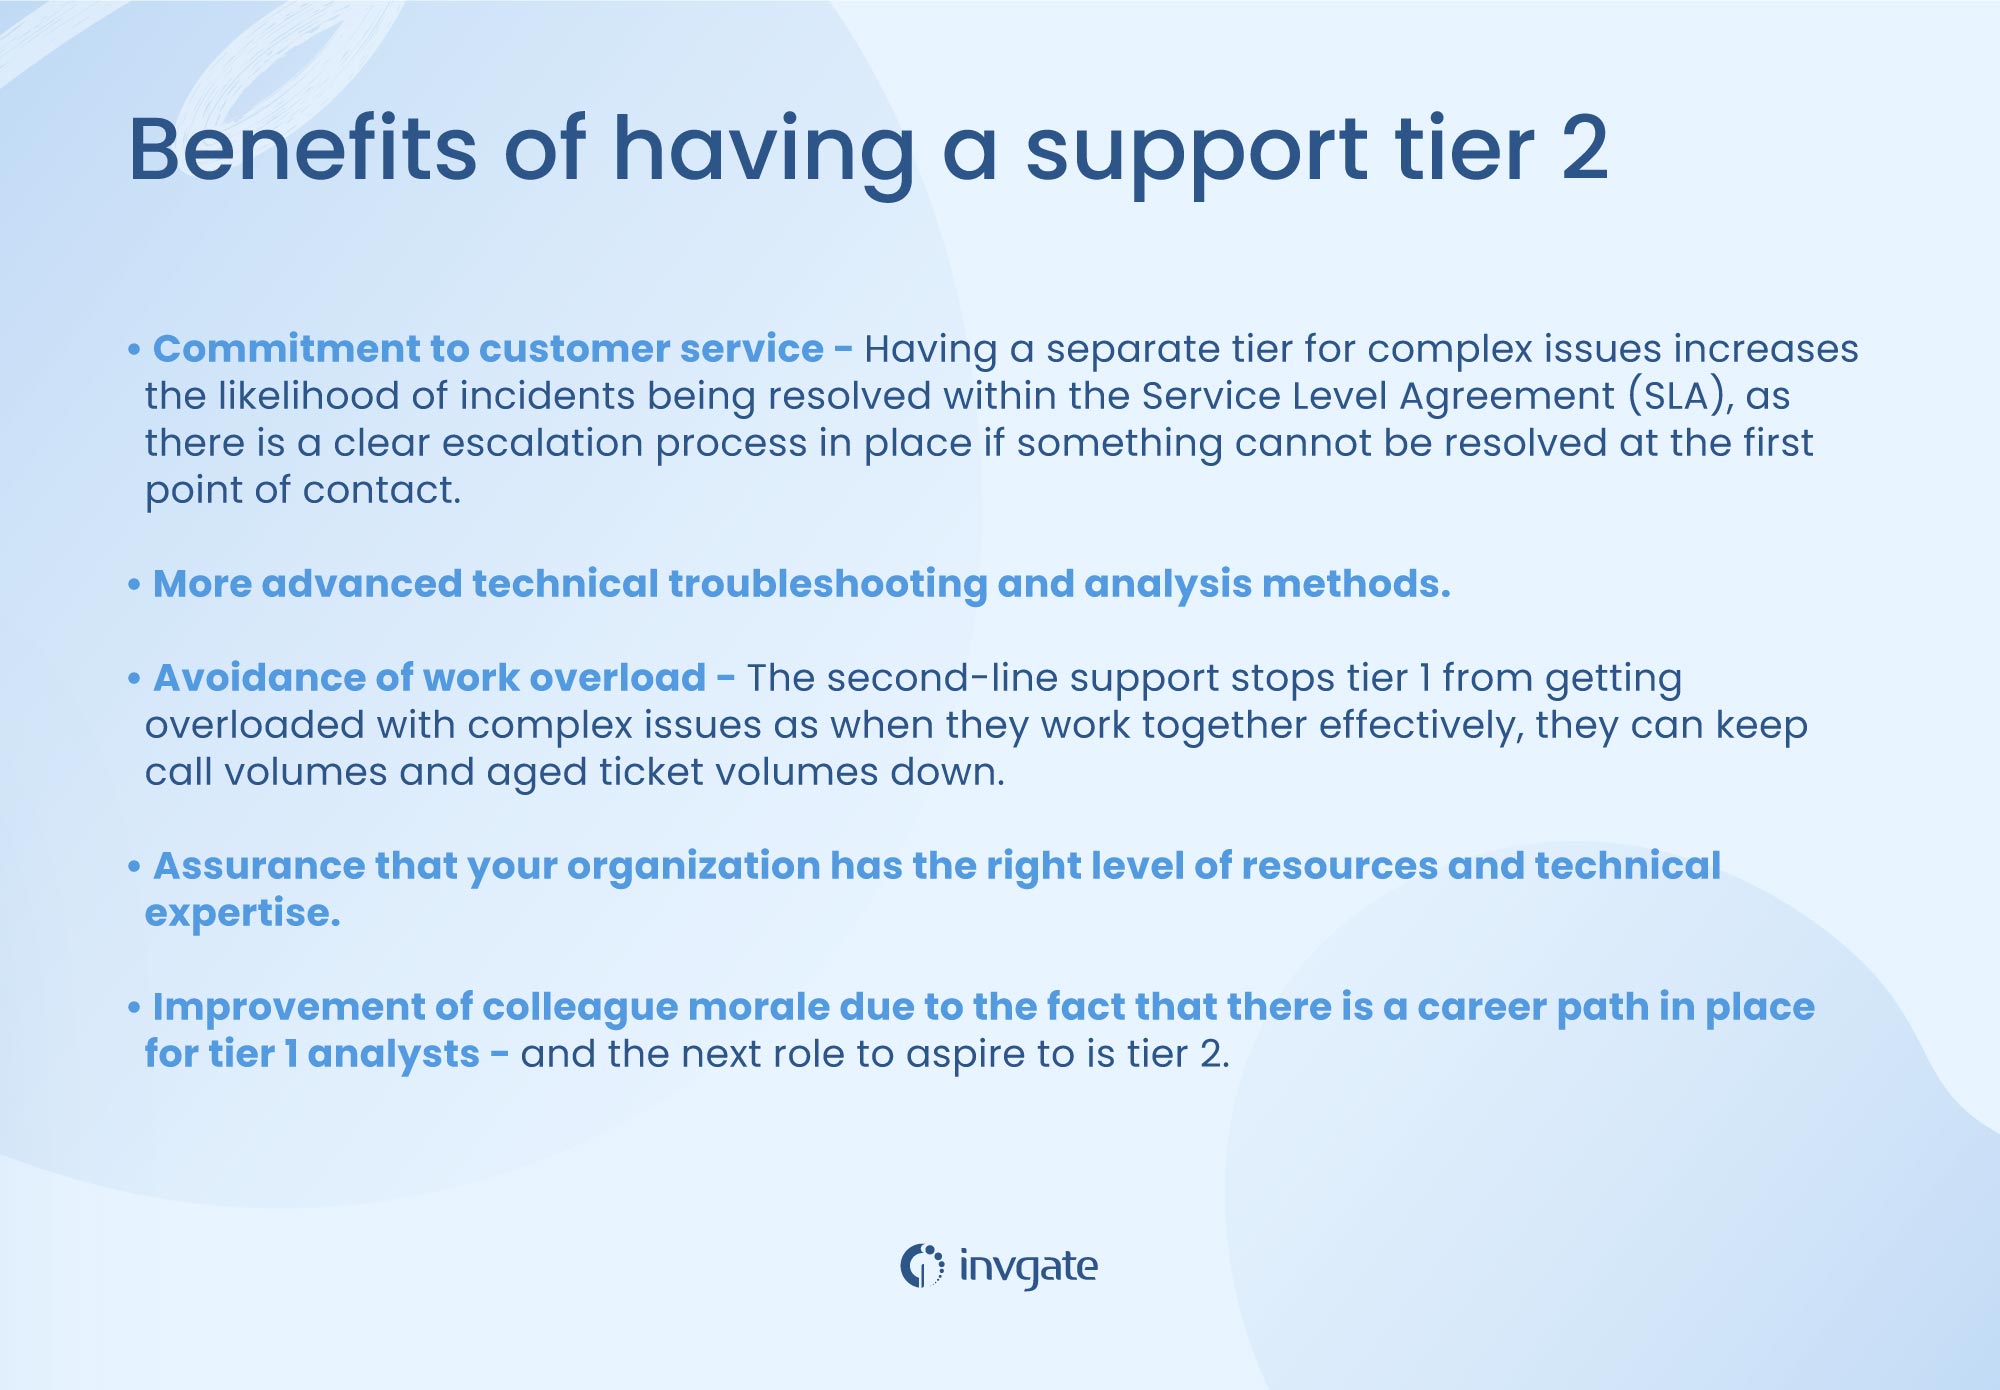 Benefits of setting up a tier 2 help desk.